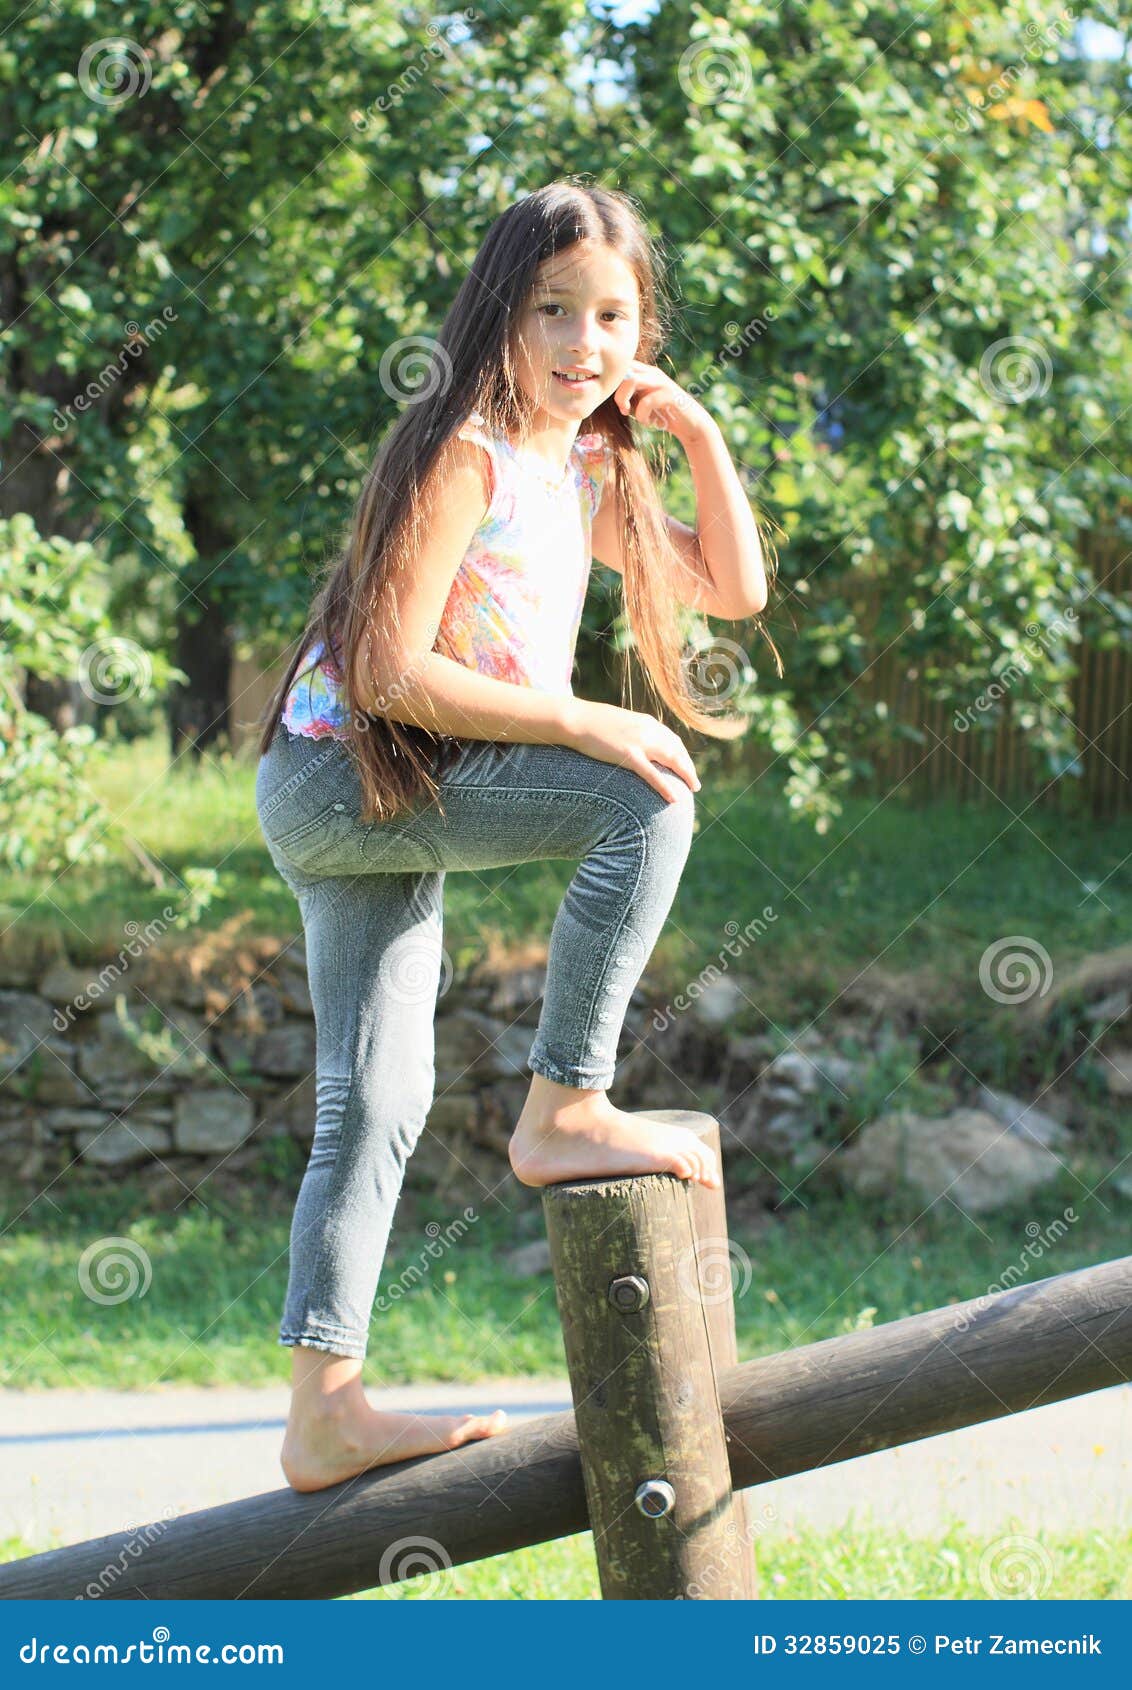 https://thumbs.dreamstime.com/z/girl-mounting-wooden-construction-barefoot-t-shirt-colorful-butterflies-grey-pants-swing-32859025.jpg